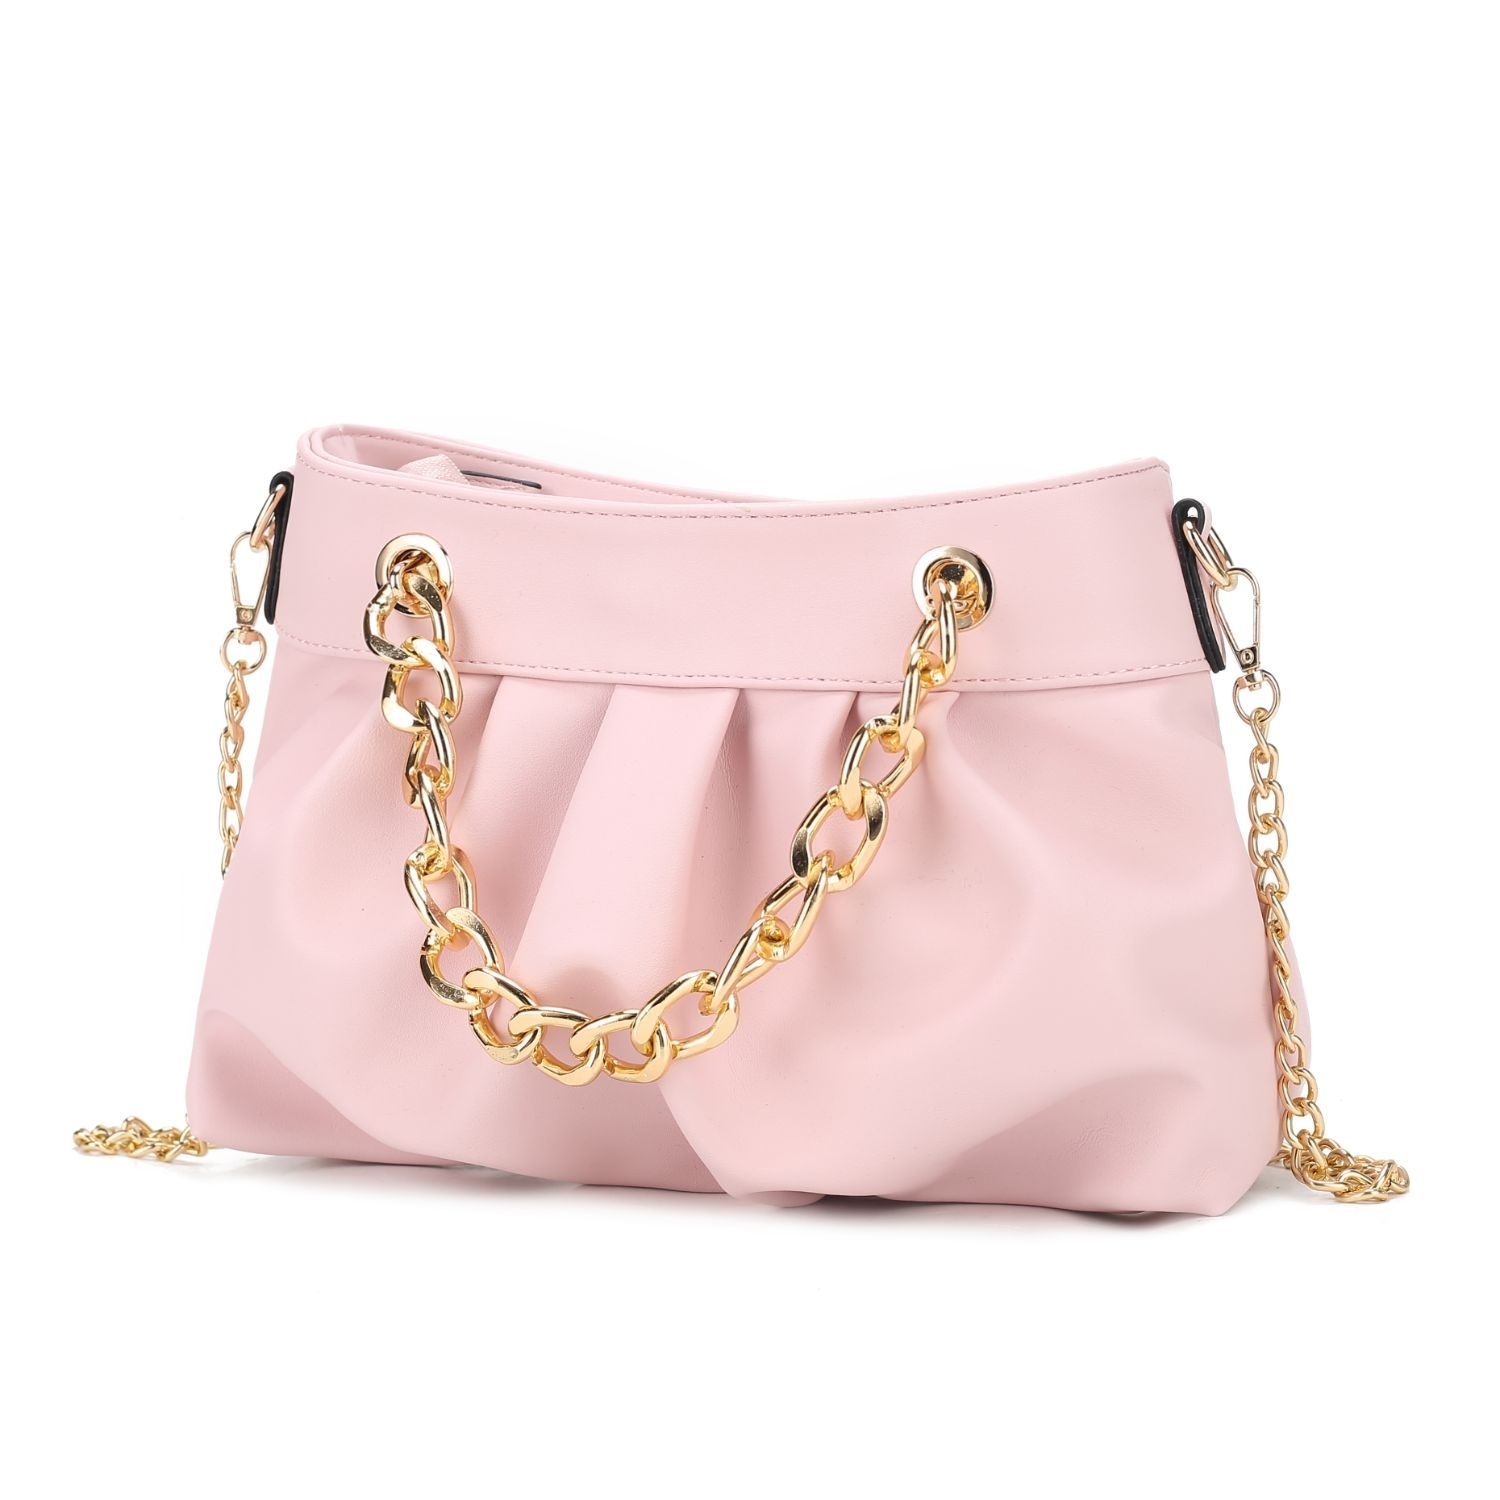 MKF Collection Marvila Minimalist Vegan Leather Chain Ruched Shoulder Bag By Mia K - Blush